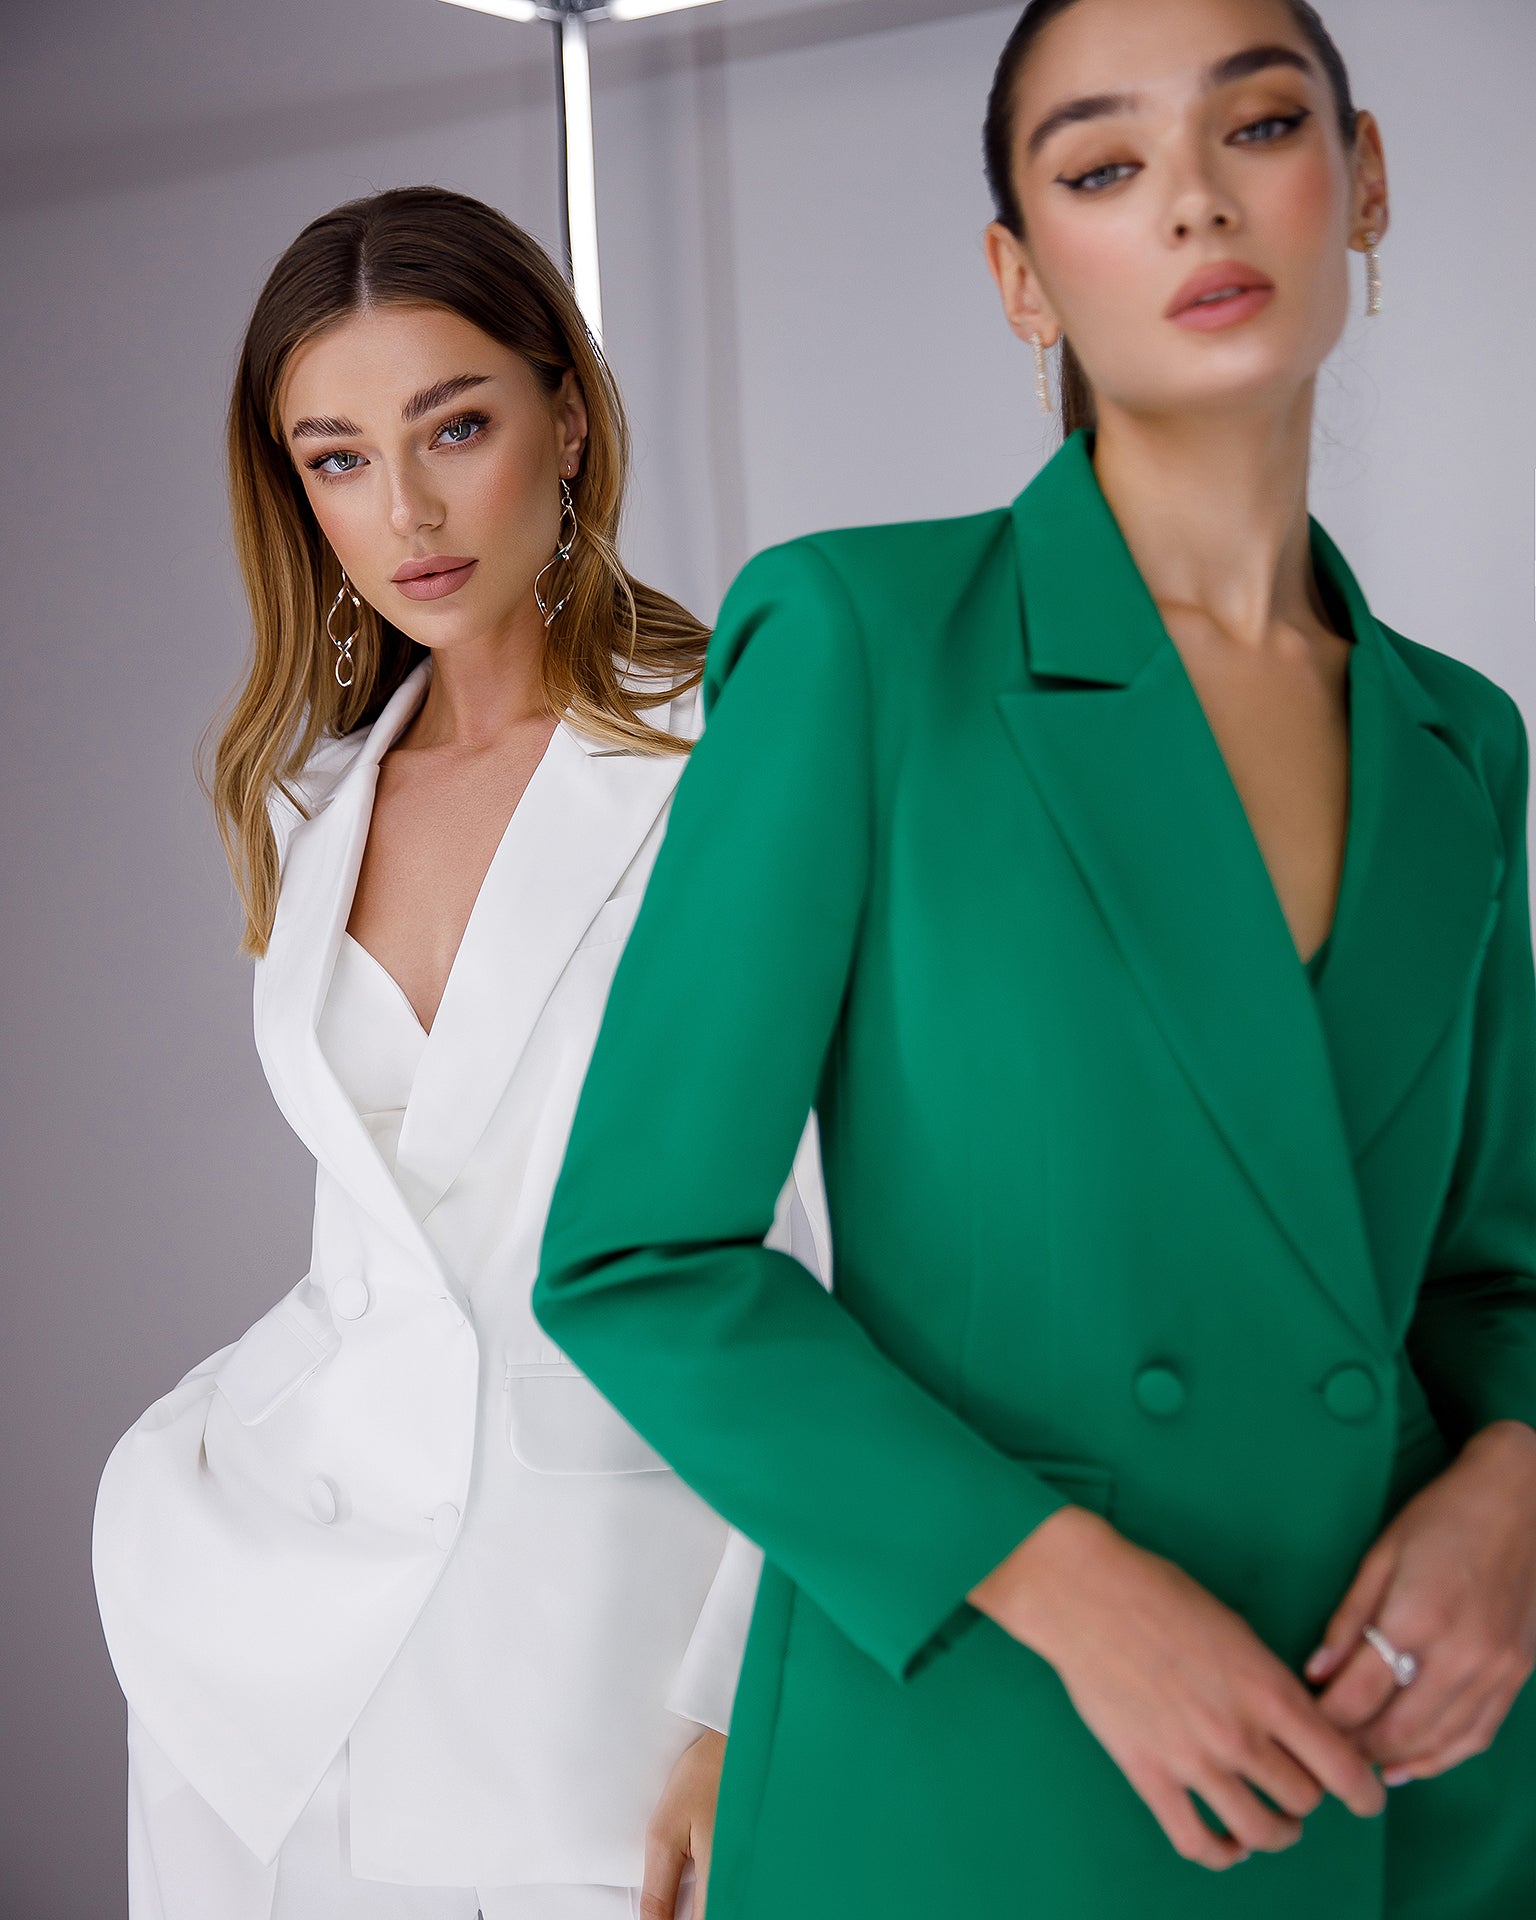 Green Double Breasted Suit 3-Piece